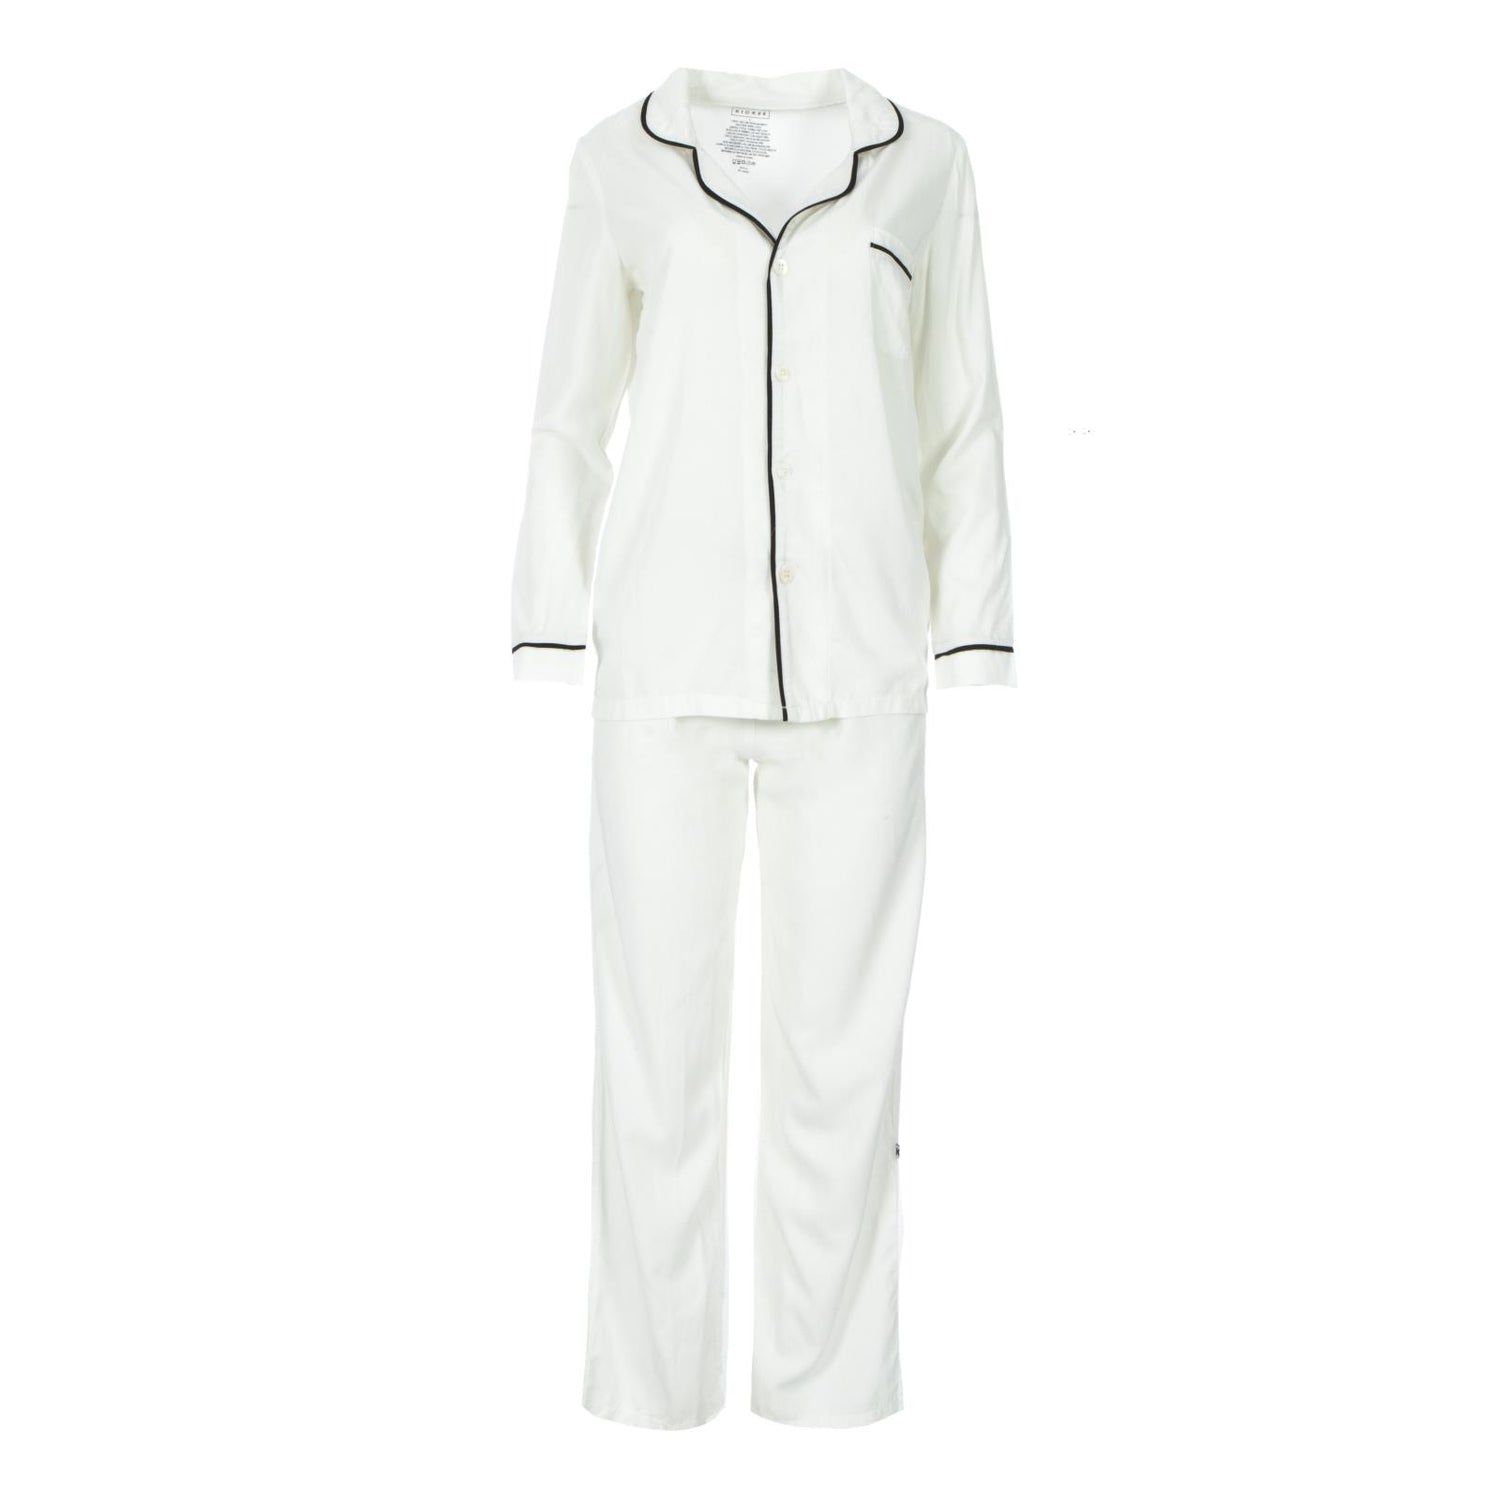 Woven Collared Pajama Set in Natural with Midnight